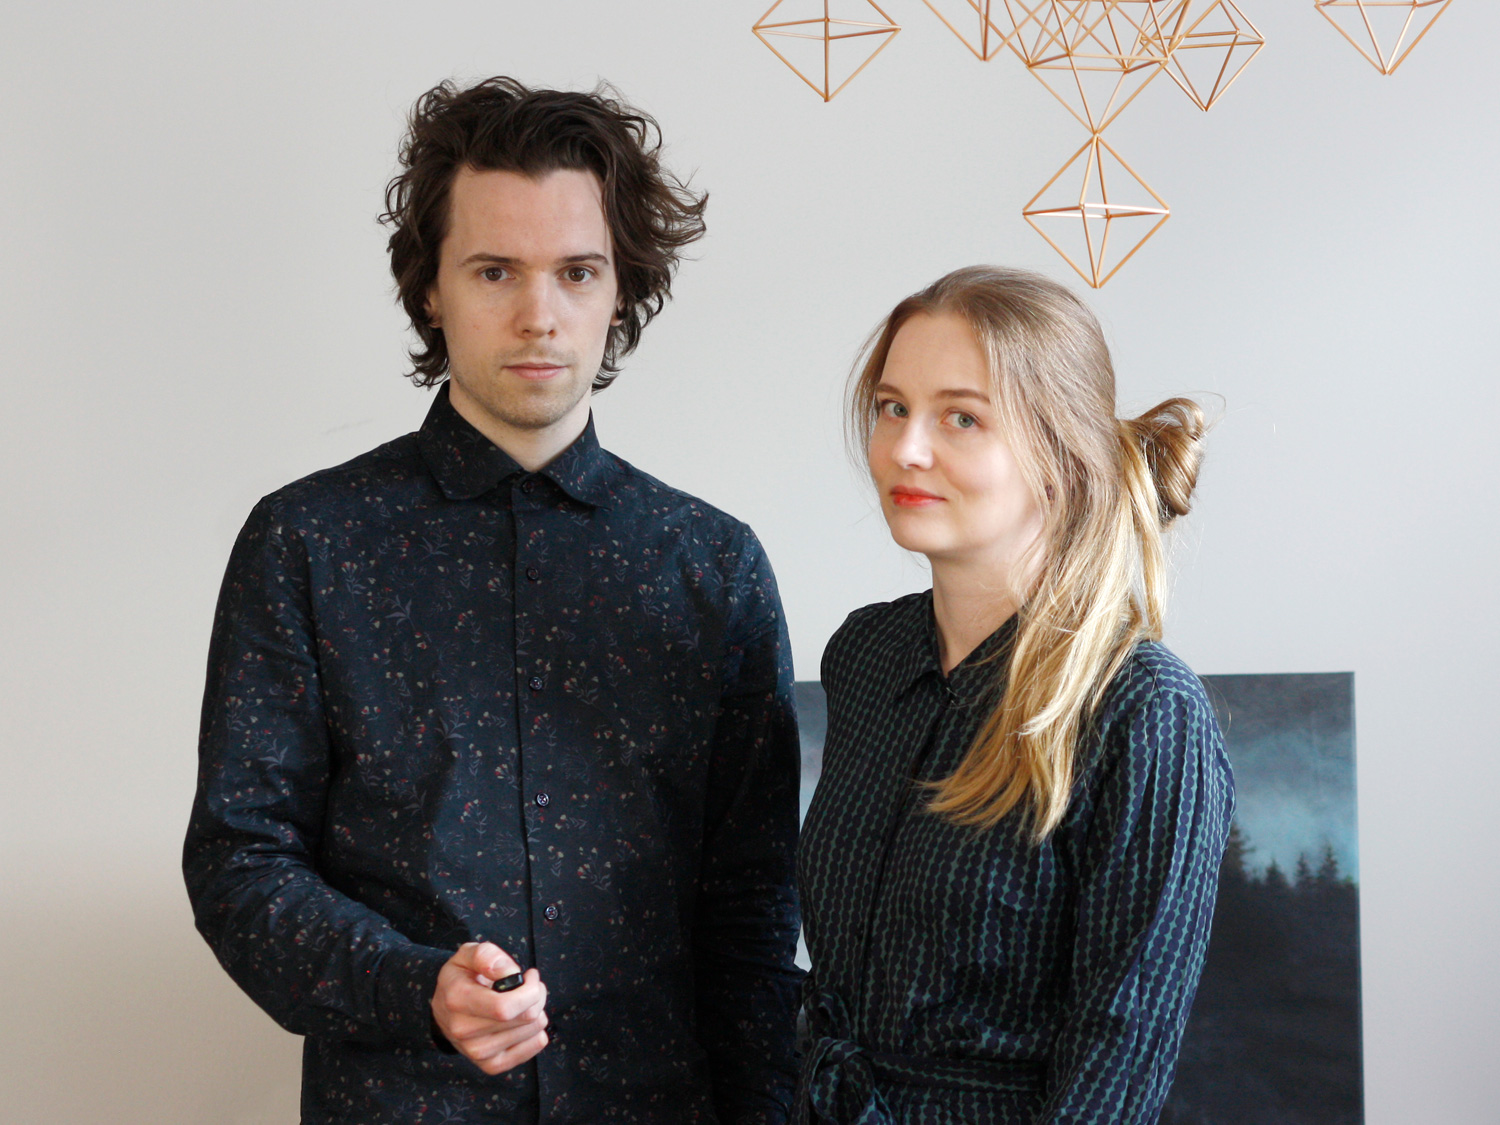 After winning the KOKUYO DESIGN AWARD and commercializing it, Milla and Erlend said, “We feel much more confident about working on our designs.” They had a relaxed discussion from beginning to end.